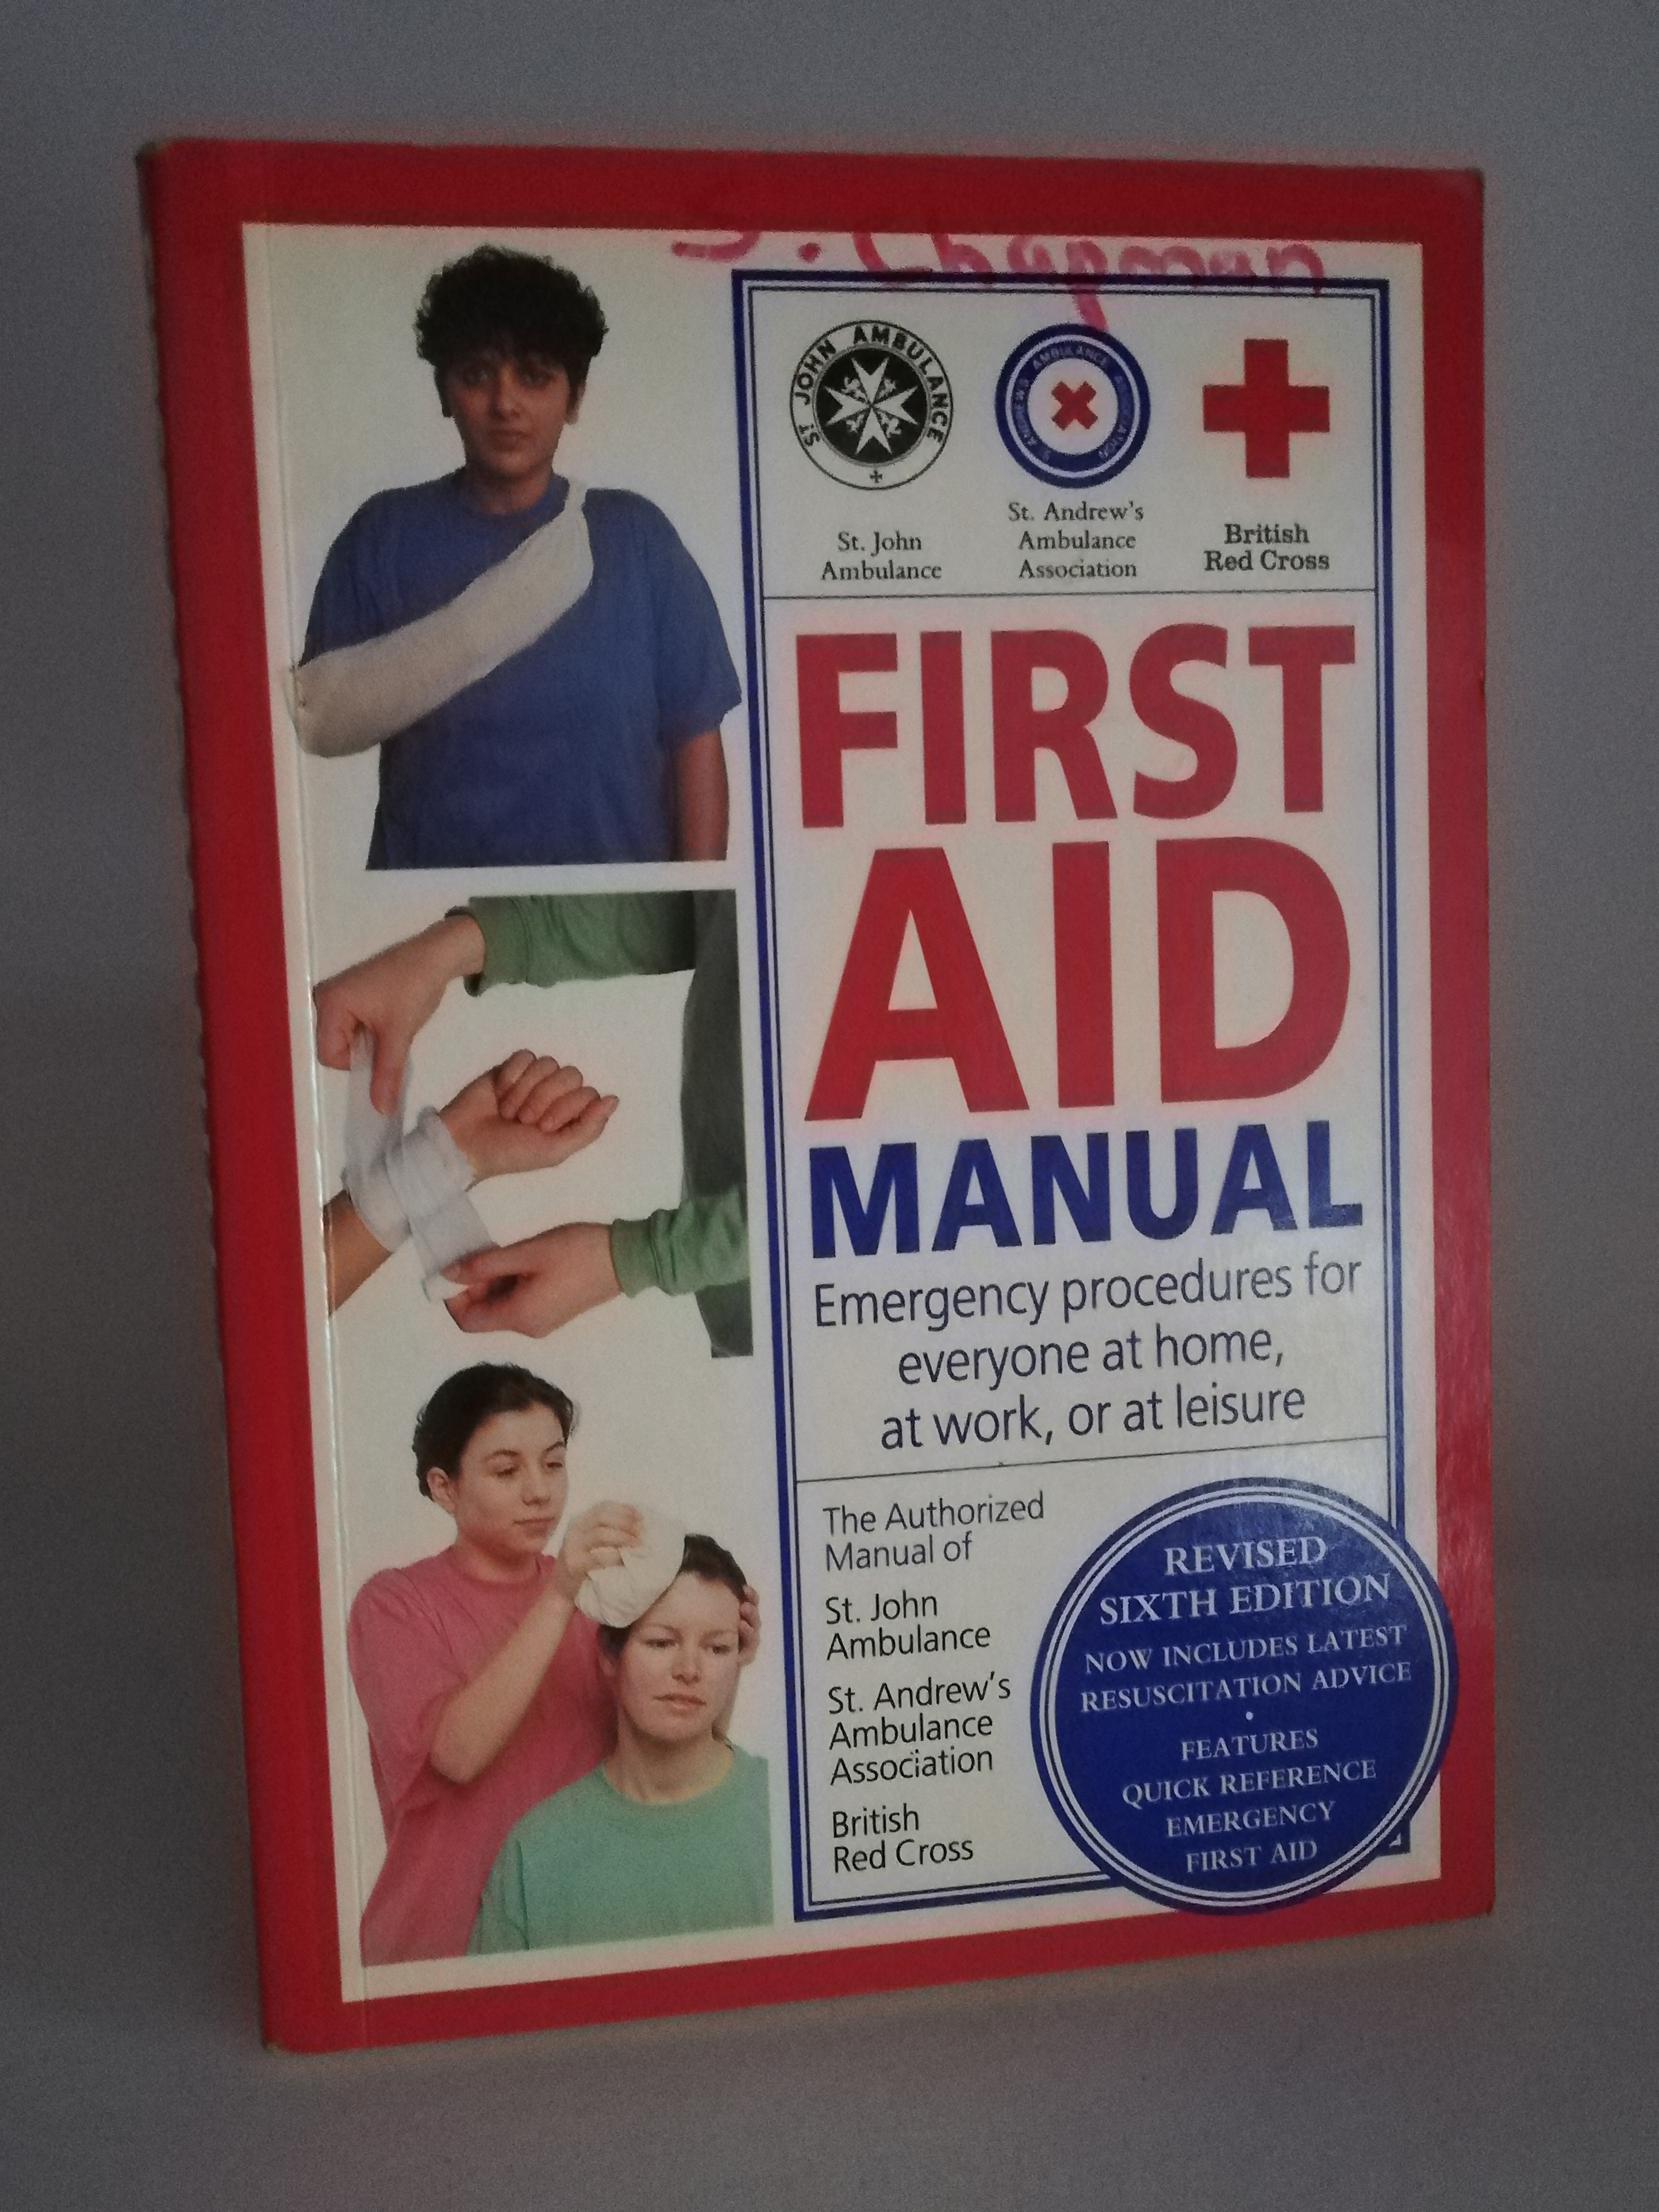   FIRST AID MANUAL. EMERGENCY PROCEDURES FOR EVERYONE AT HOME, WORK, OR AT LEISURE 